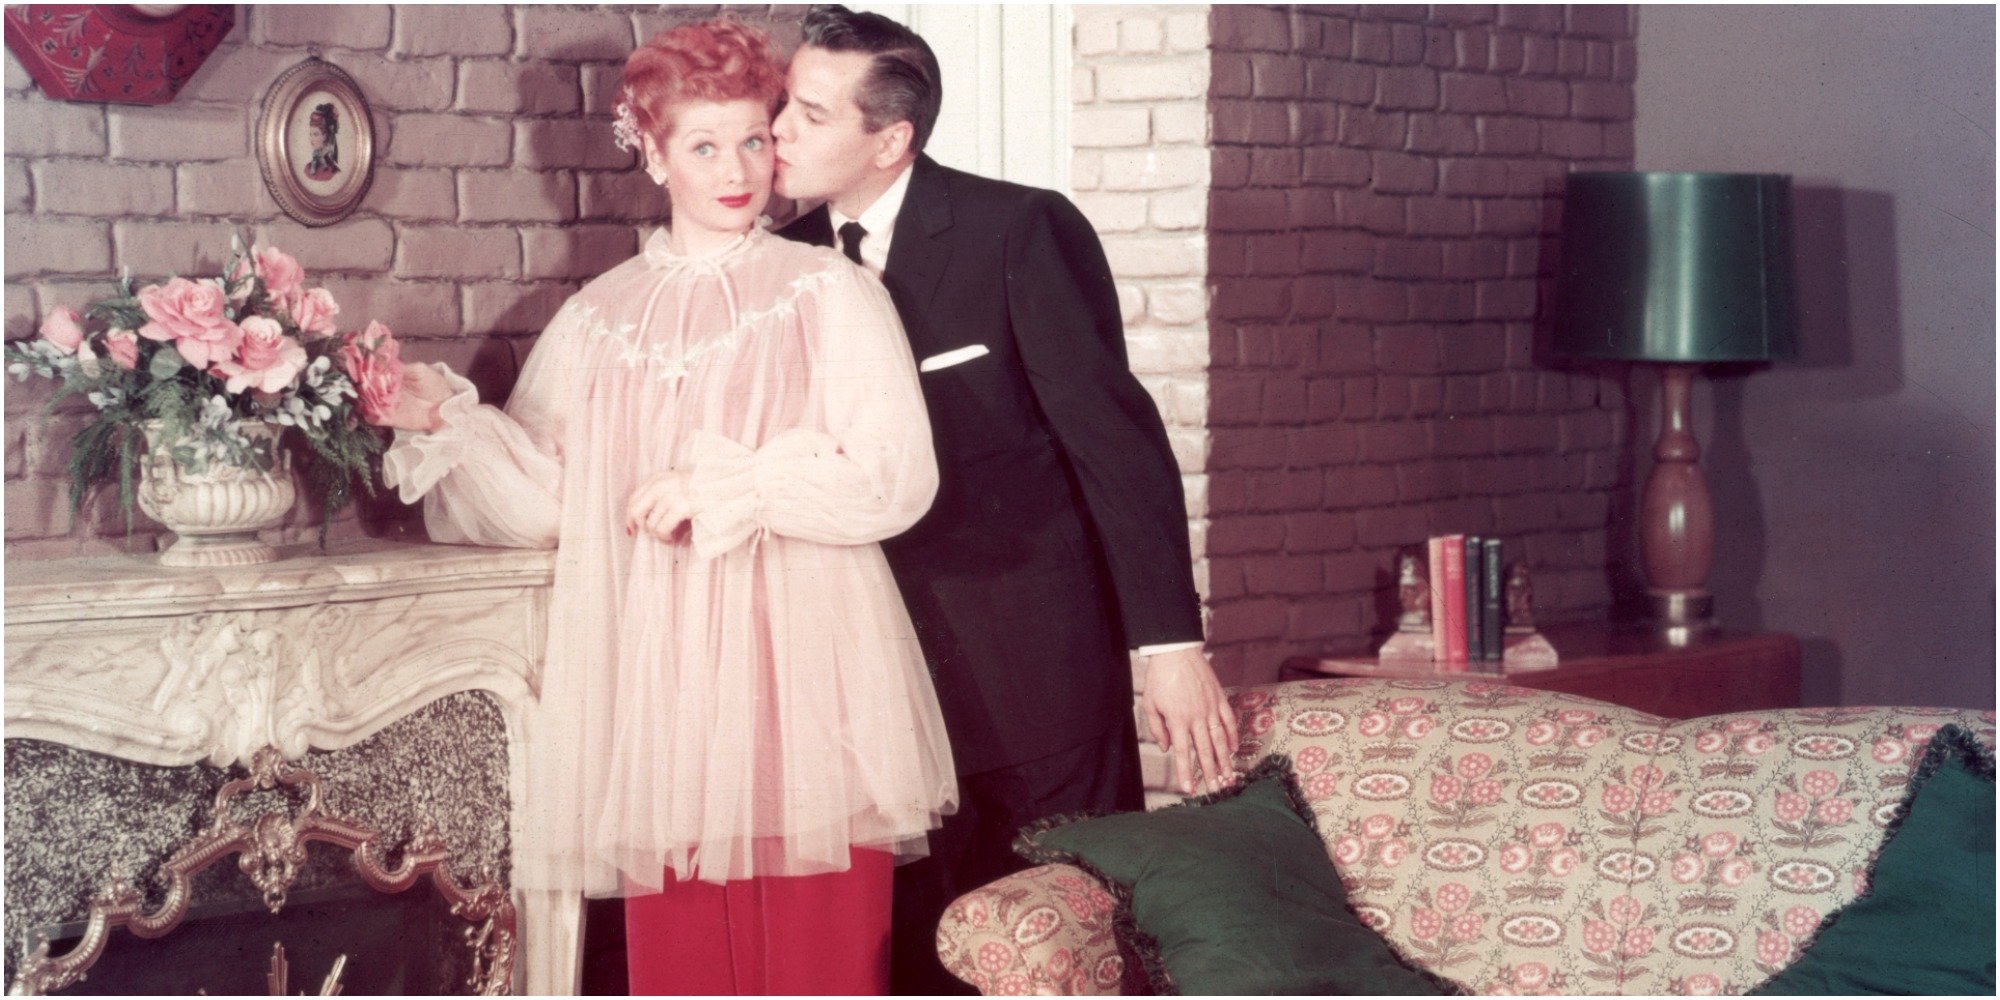 Lucille Ball and Desi Arnaz on the set of "I Love Lucy."